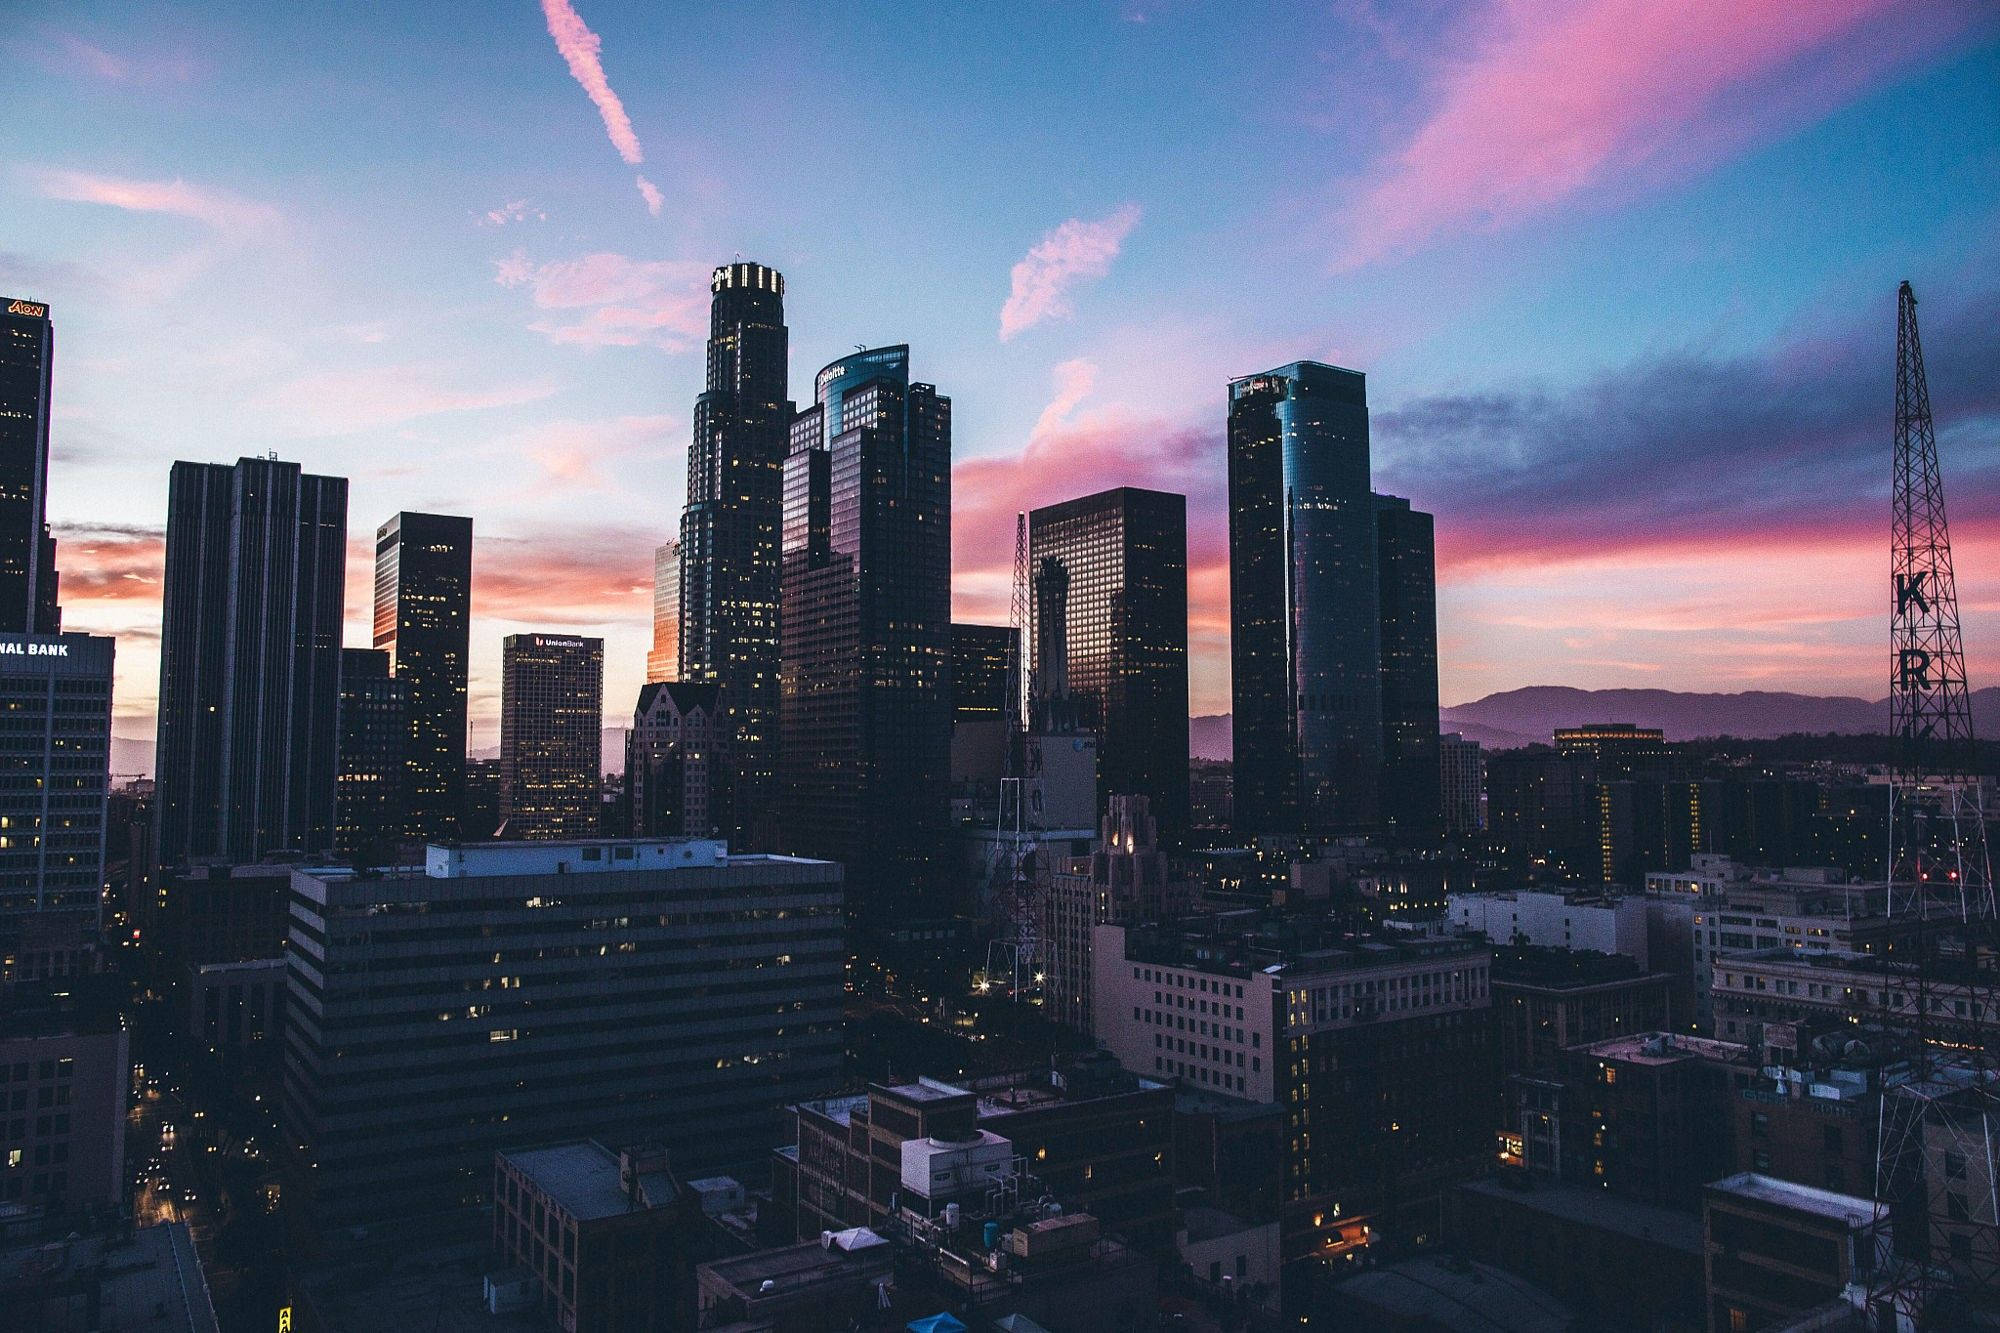 A city skyline at sunset with buildings and skyscrapers - Los Angeles